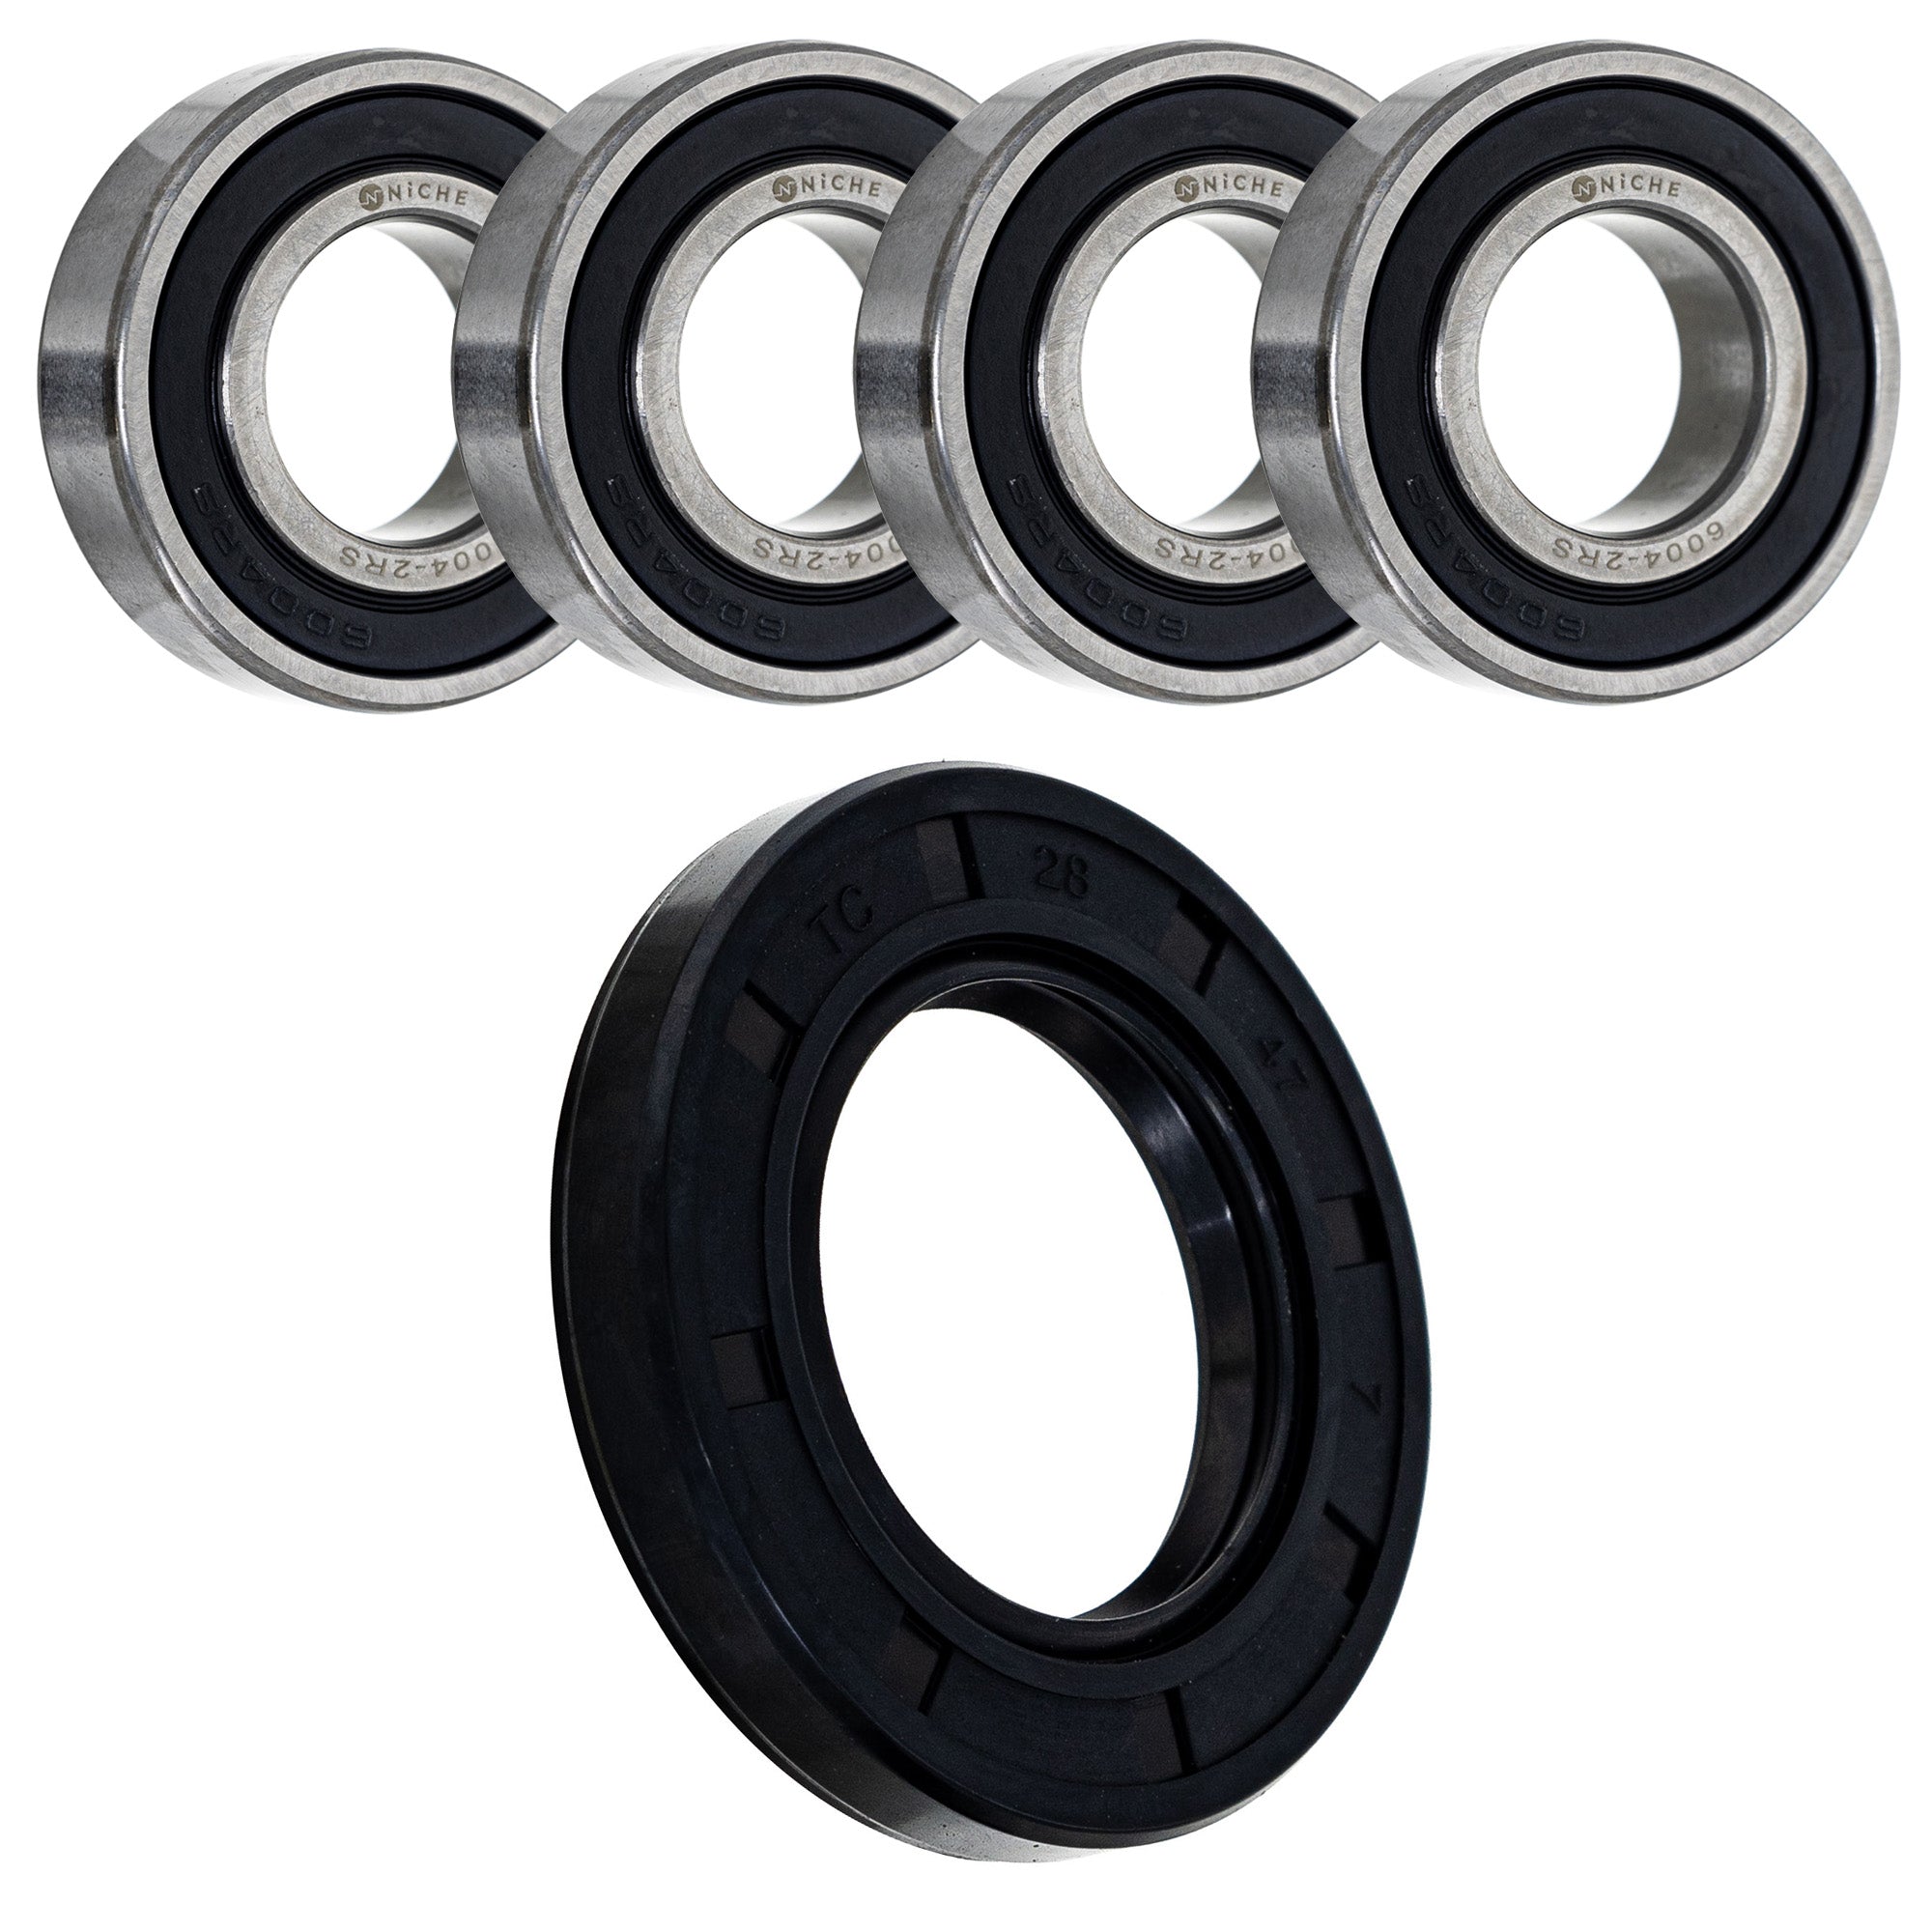 Wheel Bearing Seal Kit for zOTHER Ref No YZ250 CR250R NICHE MK1009134